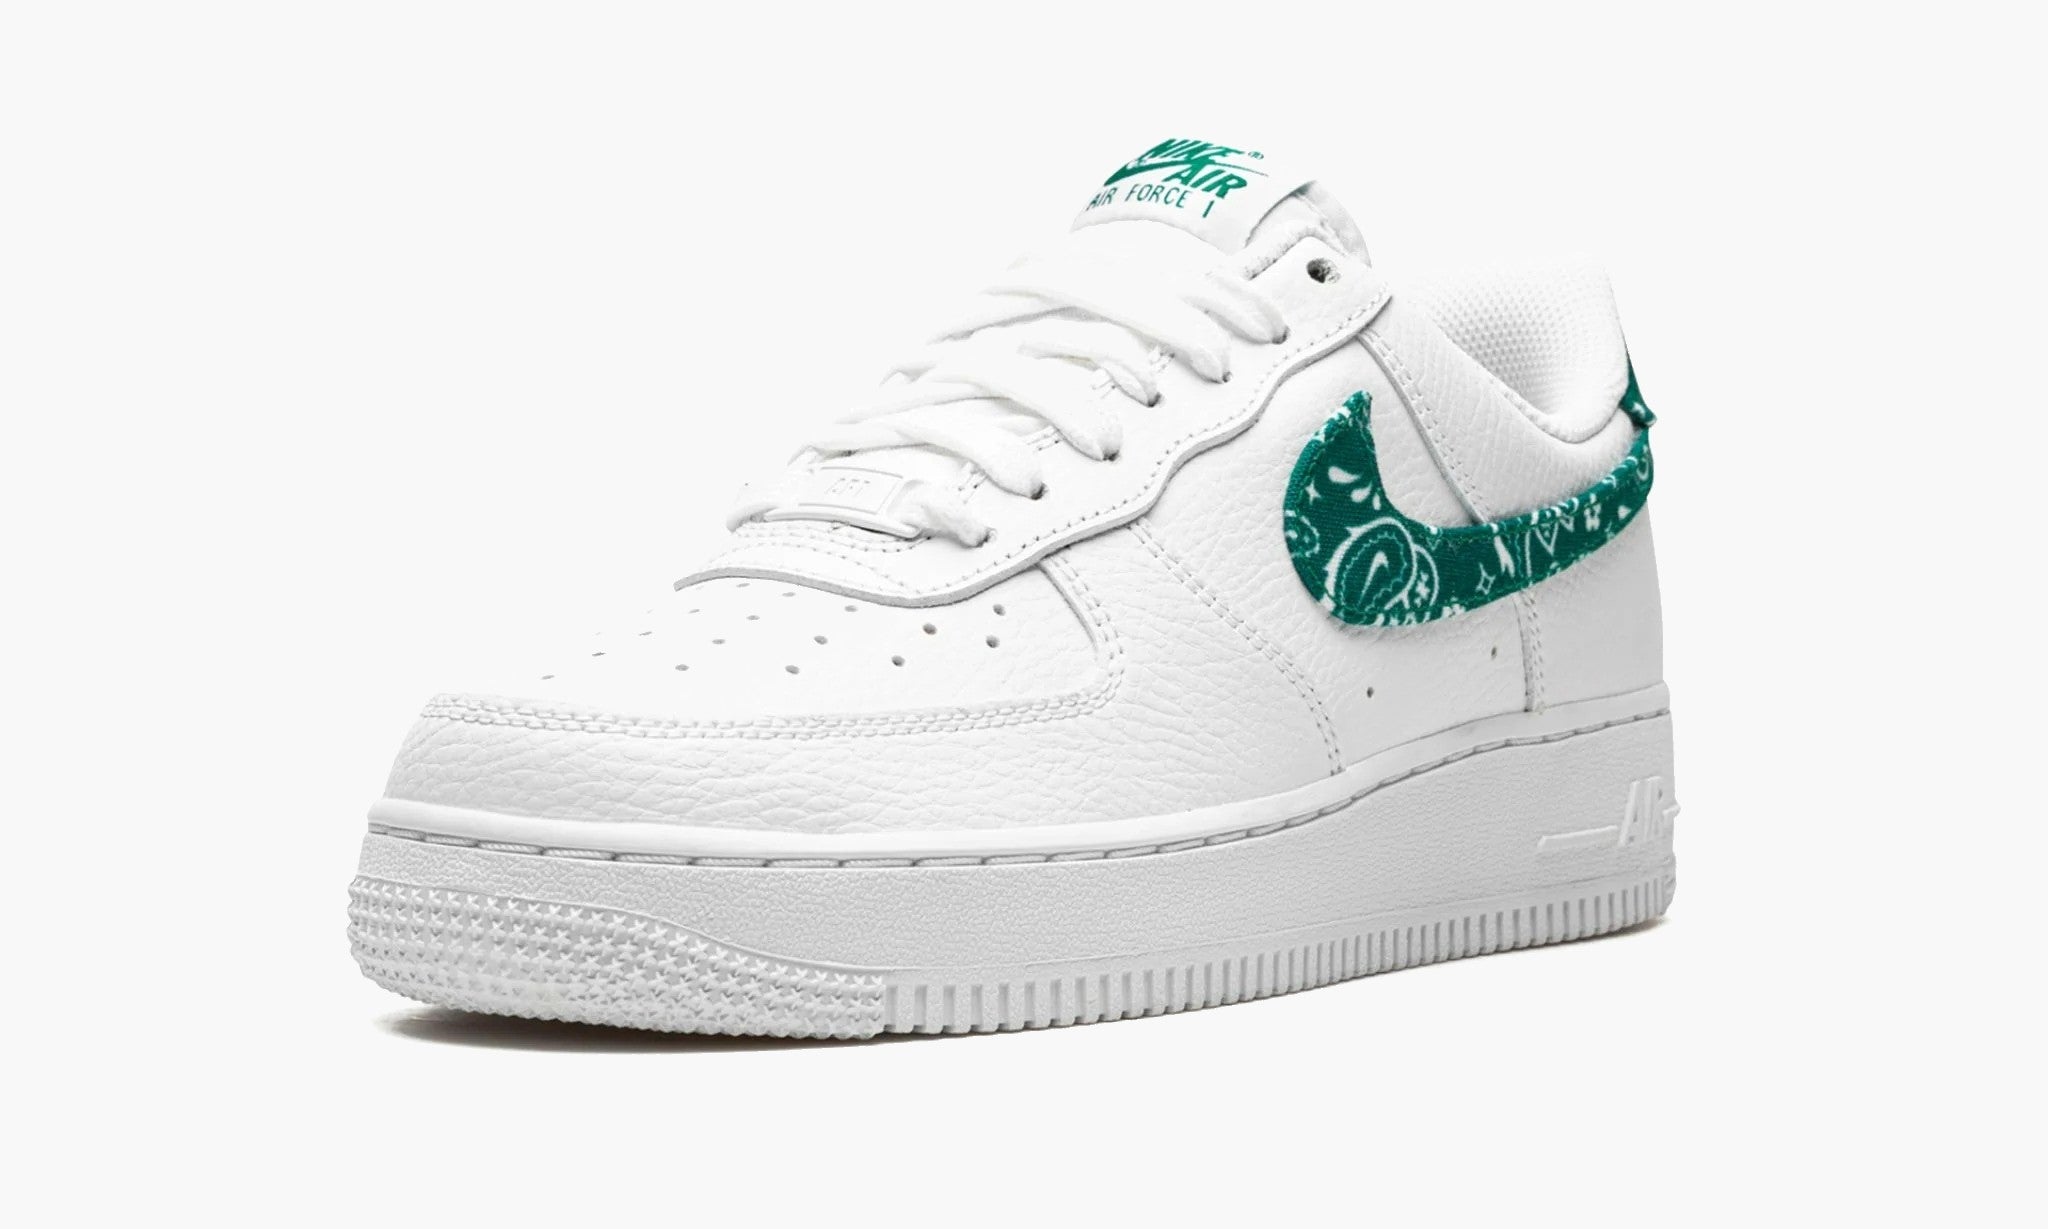 Air Force 1 LowEssential "Green Paisley